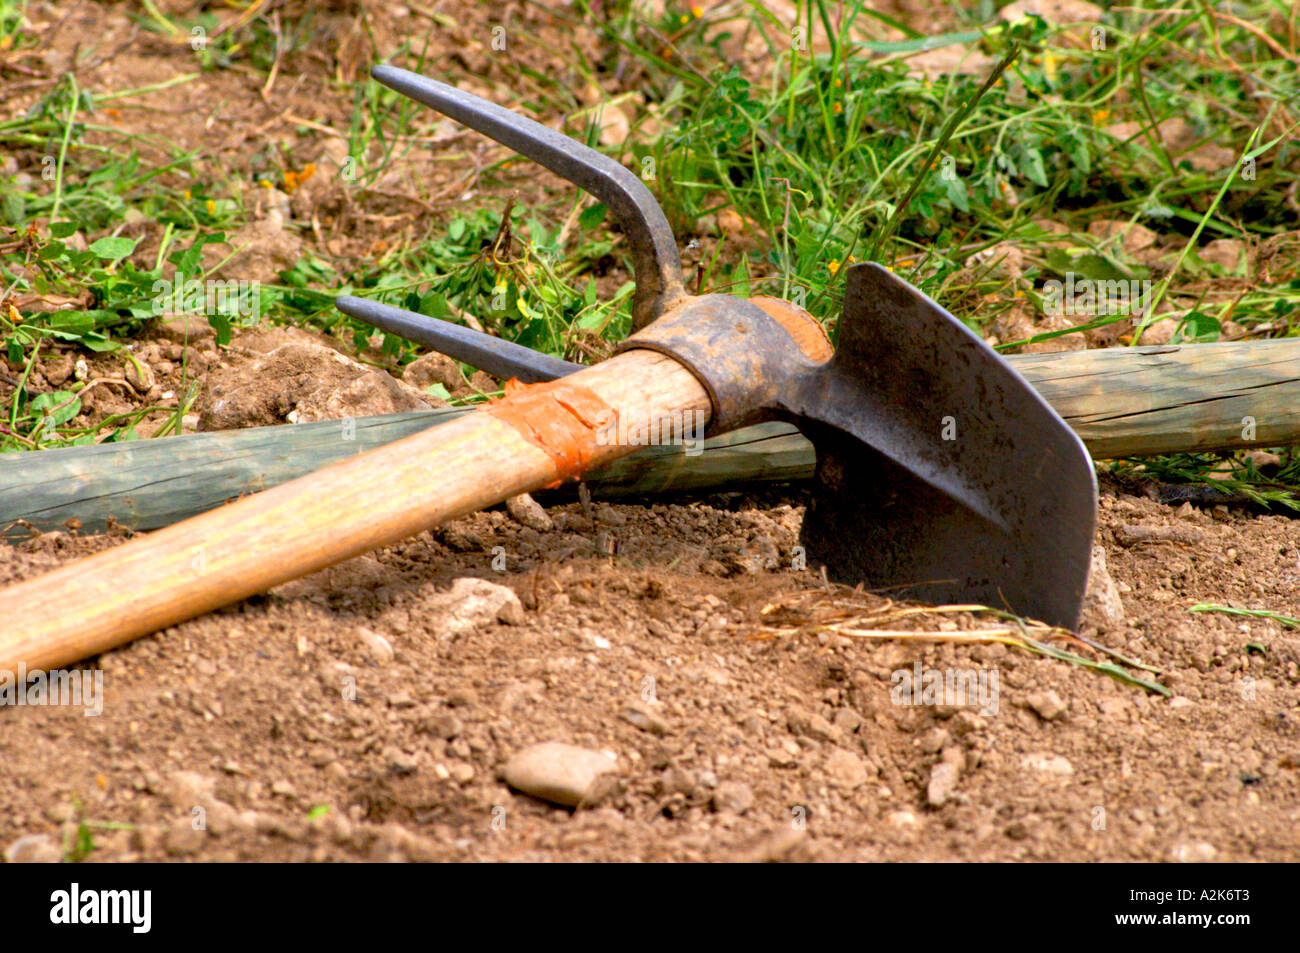 Vineyard worker tools, a pick and shovel In the vineyard Le Pavillon of M Chapoutier on the Hermitage hill, sandy and pebbly soil.   Domaine M Chapoutier, Tain l’Hermitage, Drome Drôme, France Europe Stock Photo